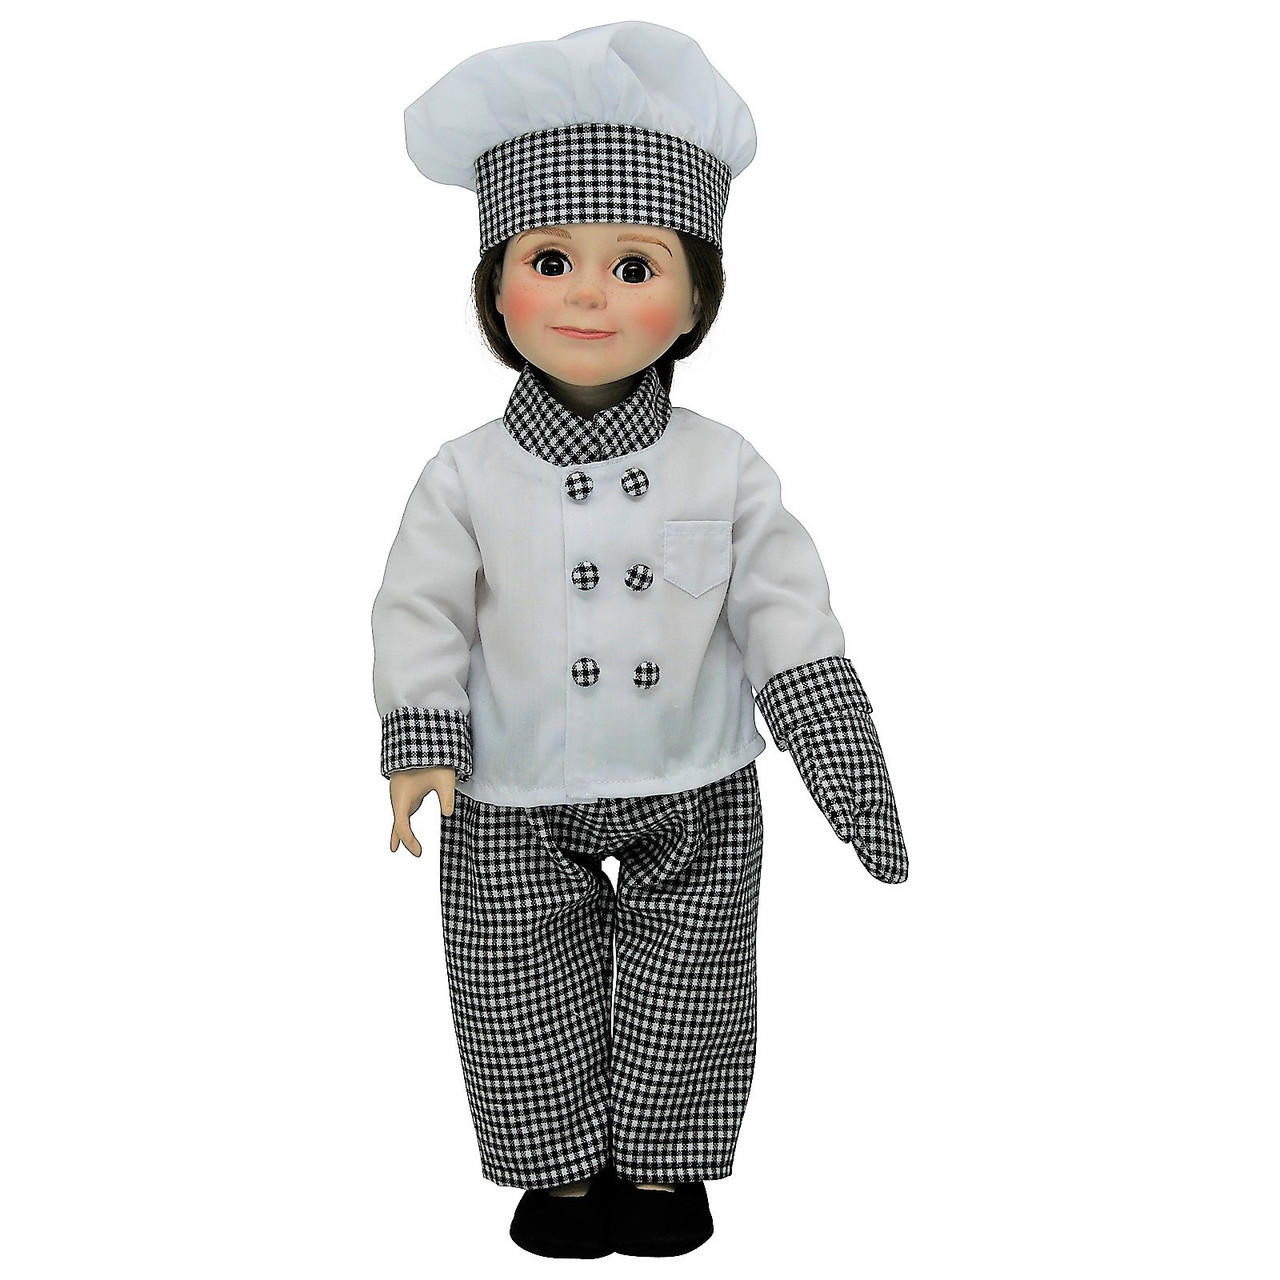 https://cdn11.bigcommerce.com/s-m5vcu70215/images/stencil/1280x1280/products/134/2920/the-queens-treasures-6-piece-pastry-chef-outfit-clothes-for-18-inch-dolls__77829.1692297942.jpg?c=1